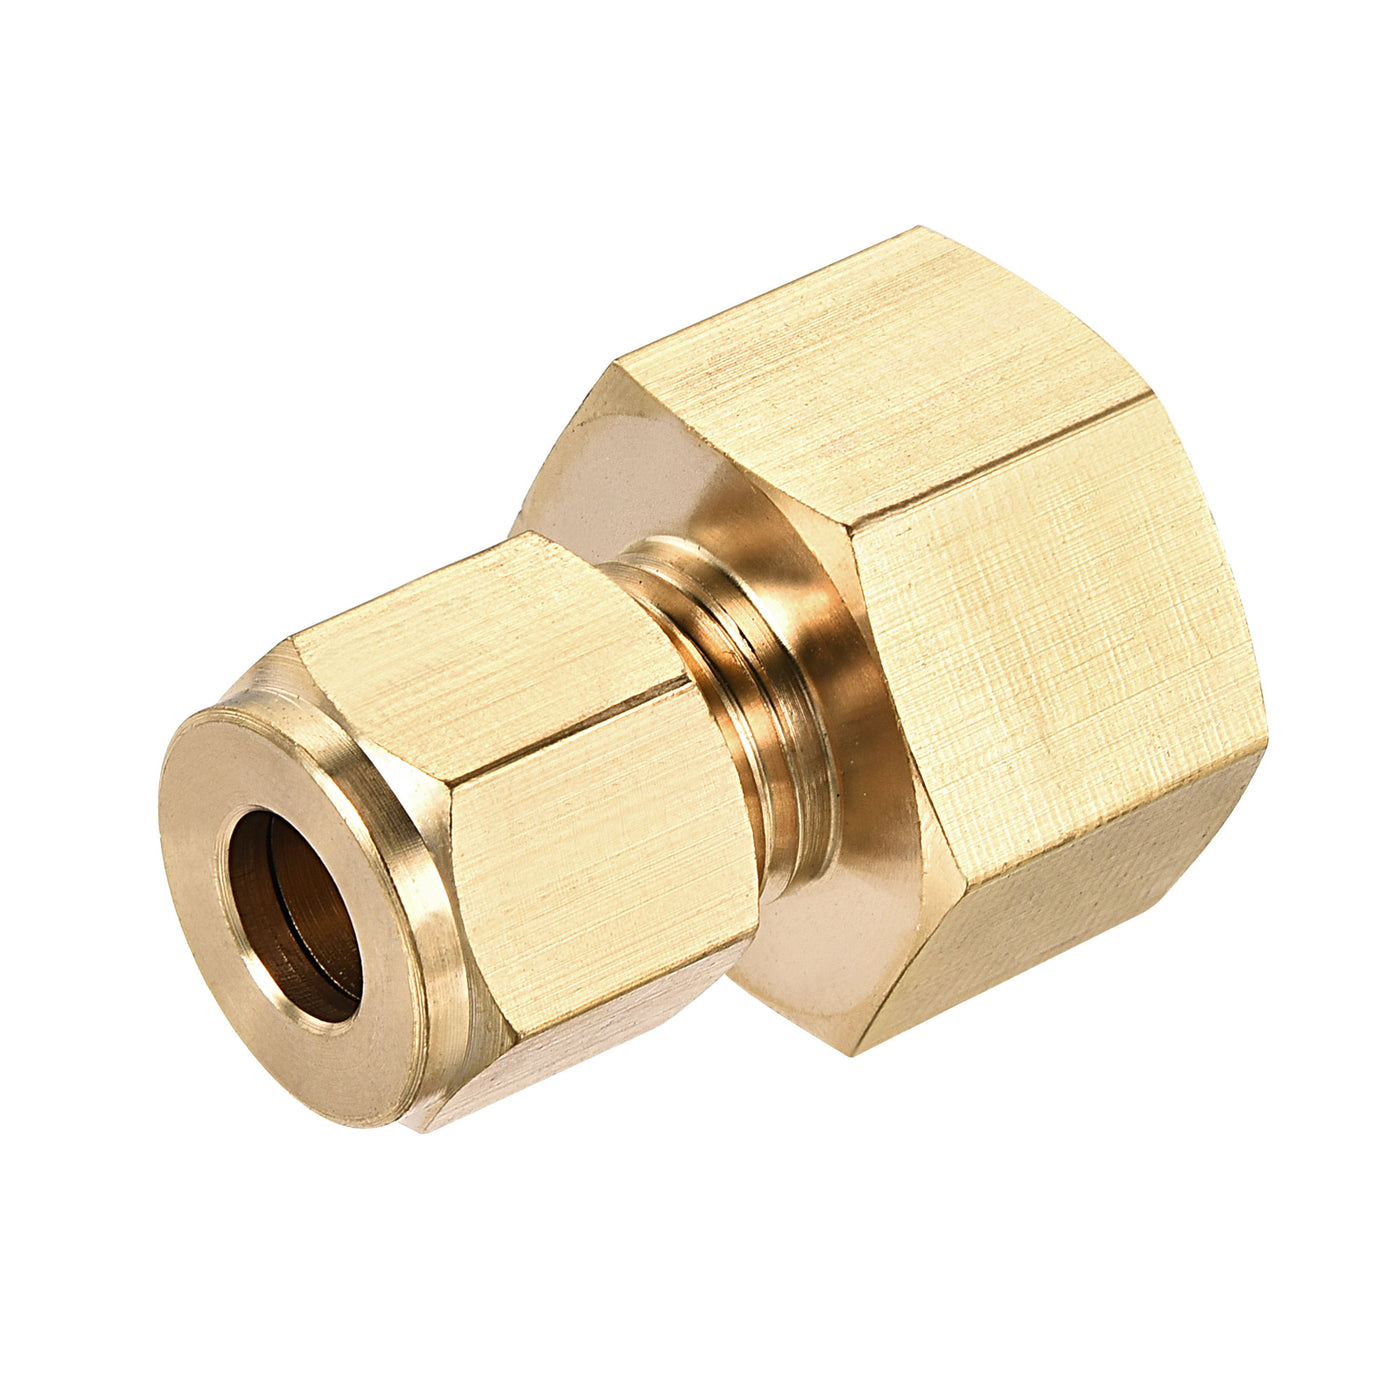 Uxcell Uxcell Compression Tube Fitting G1/2 Female Thread x 12mm Tube OD Straight Coupling Adapter Brass